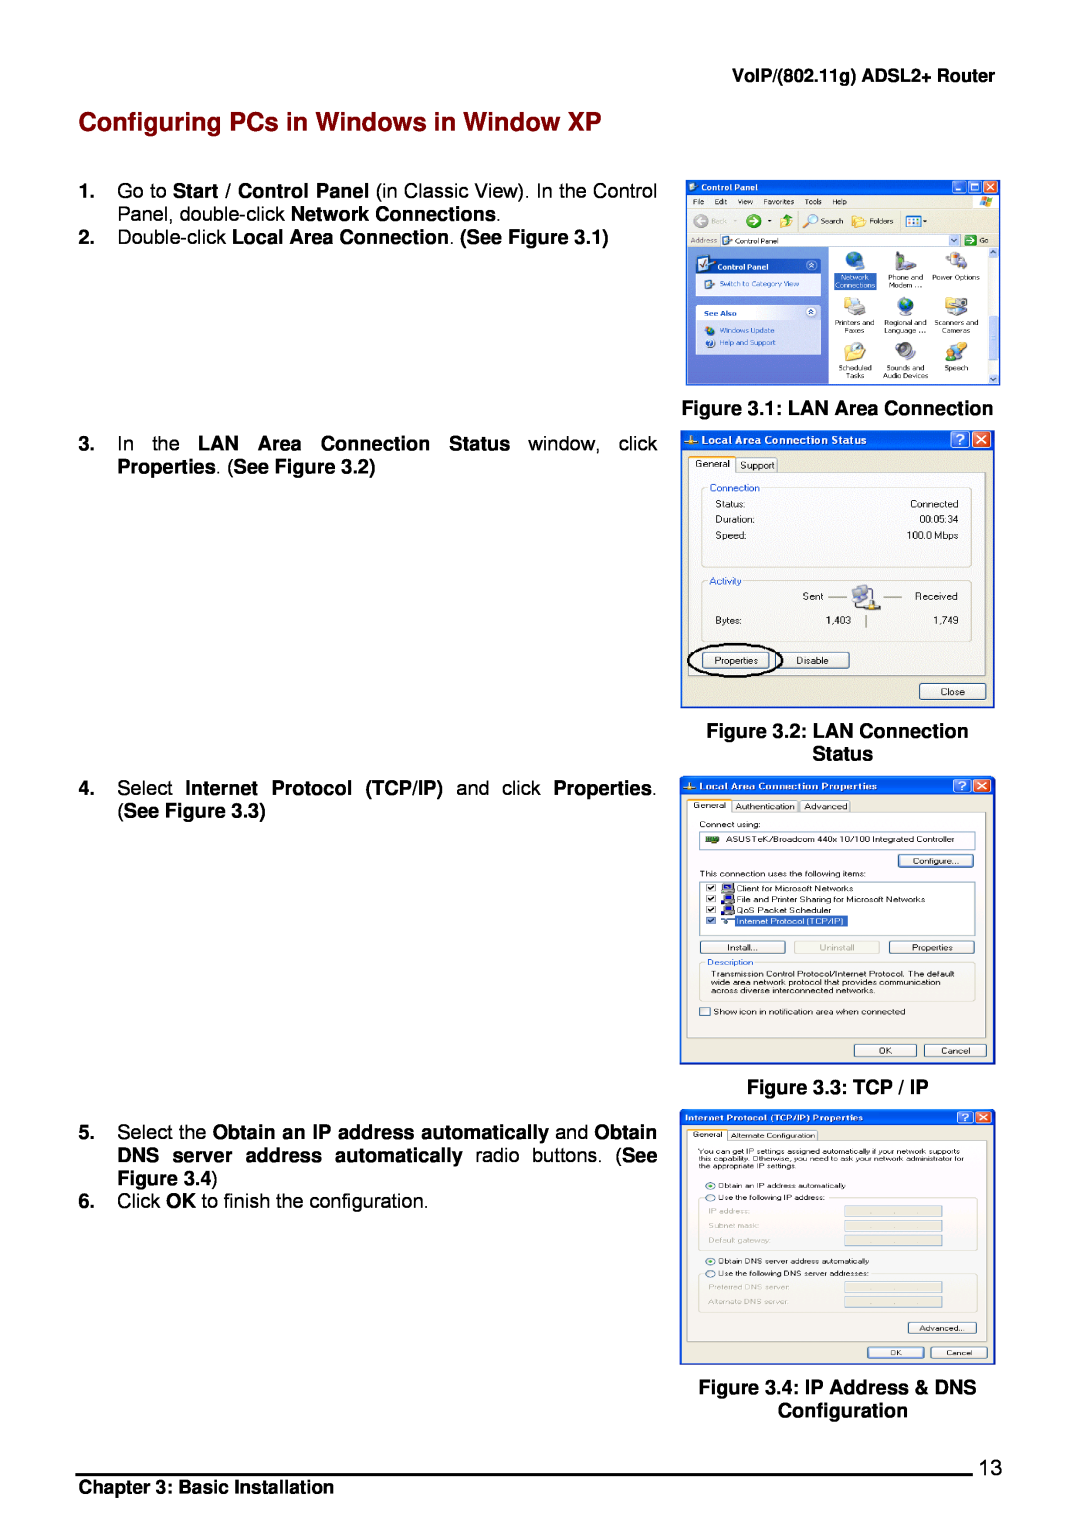 Billion Electric Company 7402VL Configuring PCs in Windows in Window XP, Double-click Local Area Connection. See Figure 